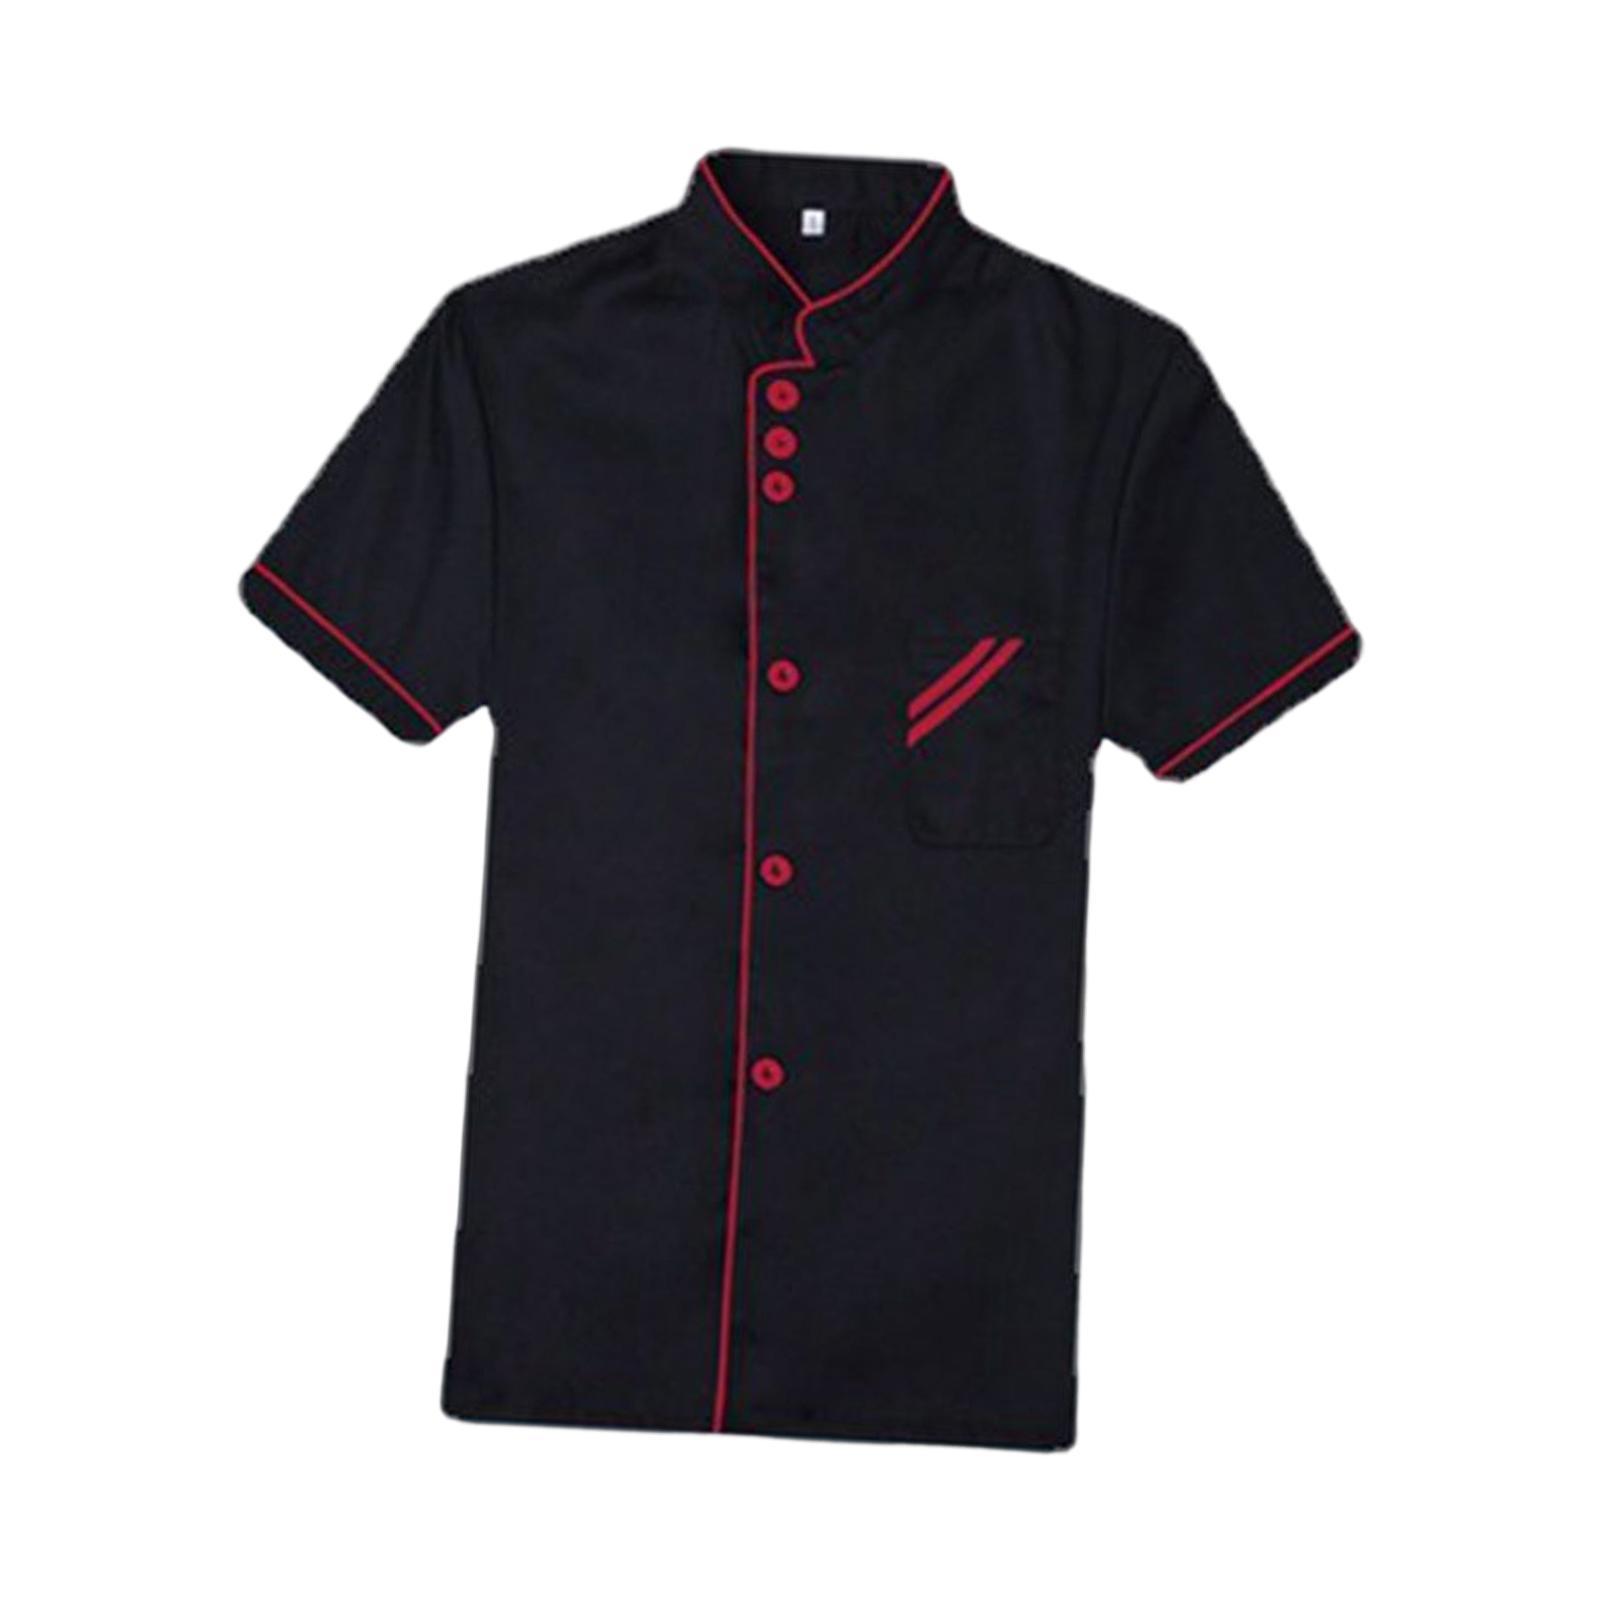 Chef Jacket Waiter Waitress Apparel Comfortable  for